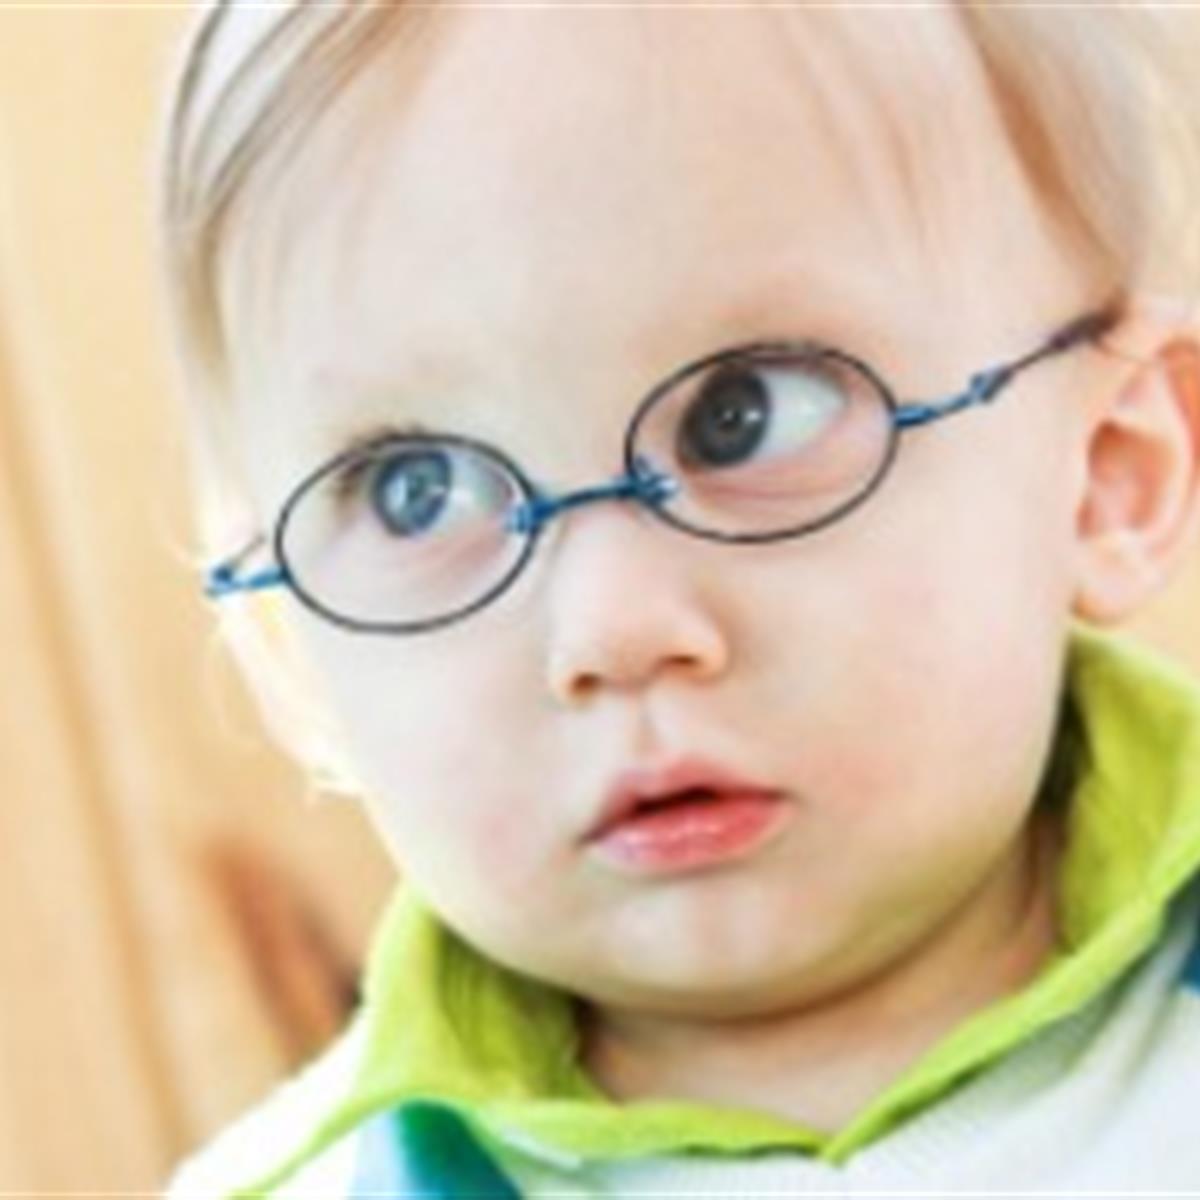 What vision problems can a 2 year old have?